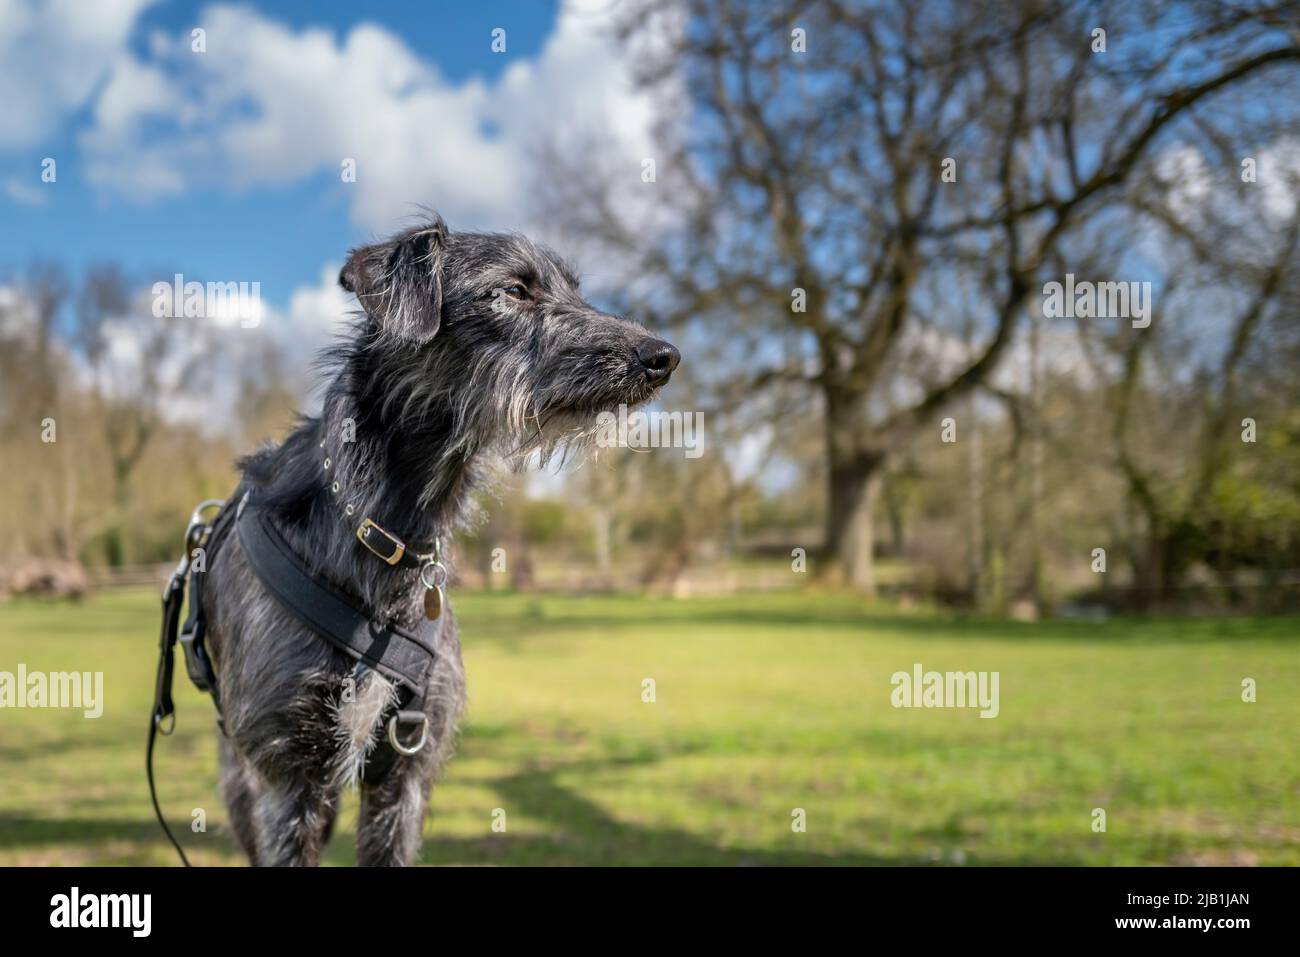 A Dog stands on an old tree stump looking out. Stock Photo